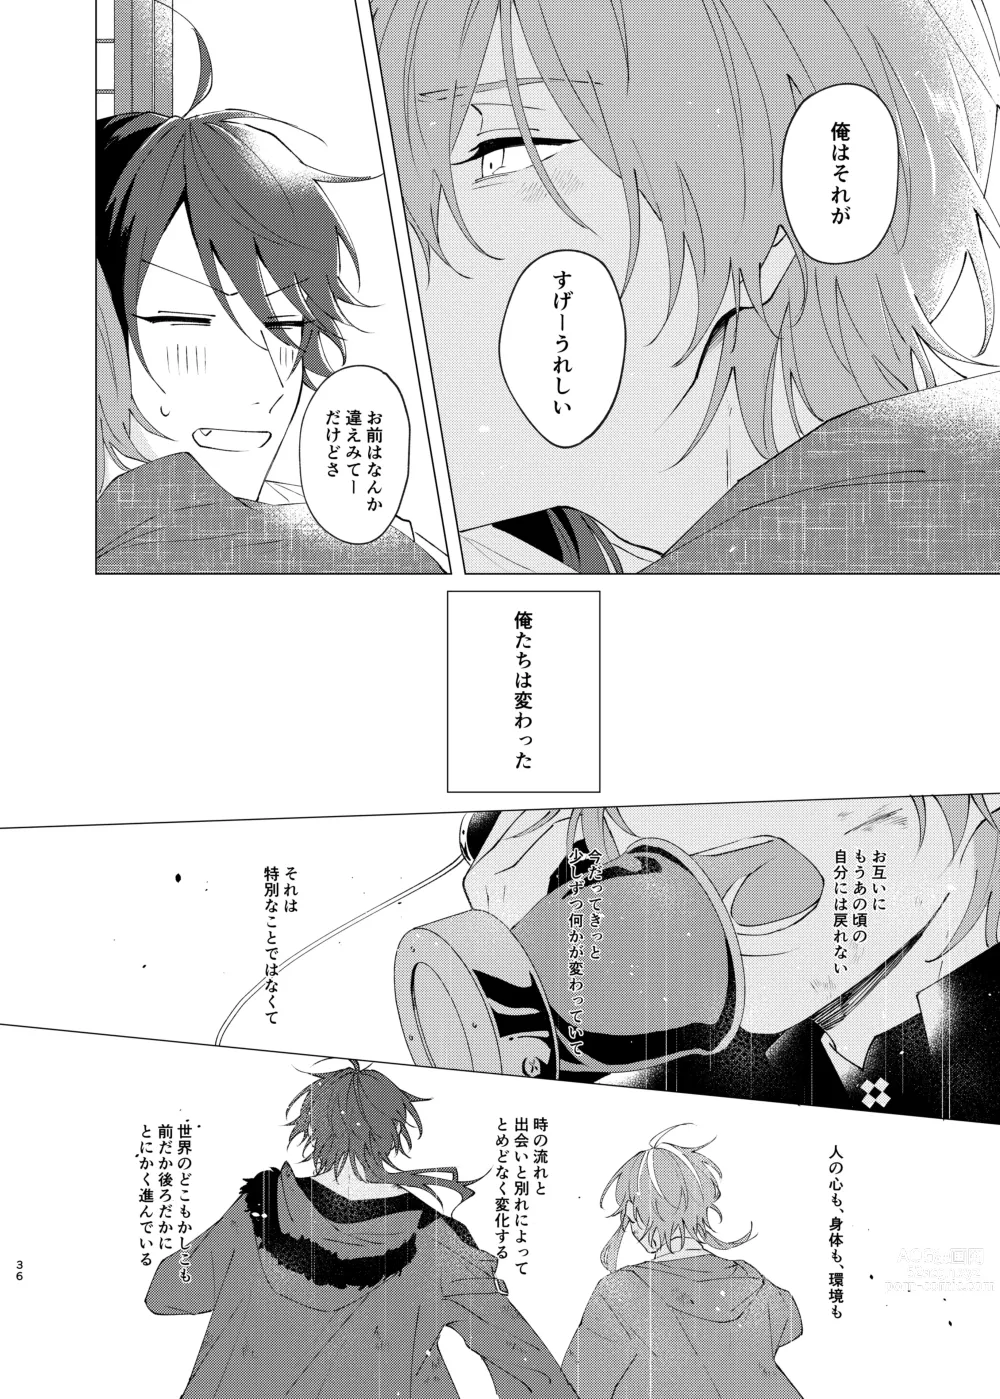 Page 34 of doujinshi Im leaving for good.